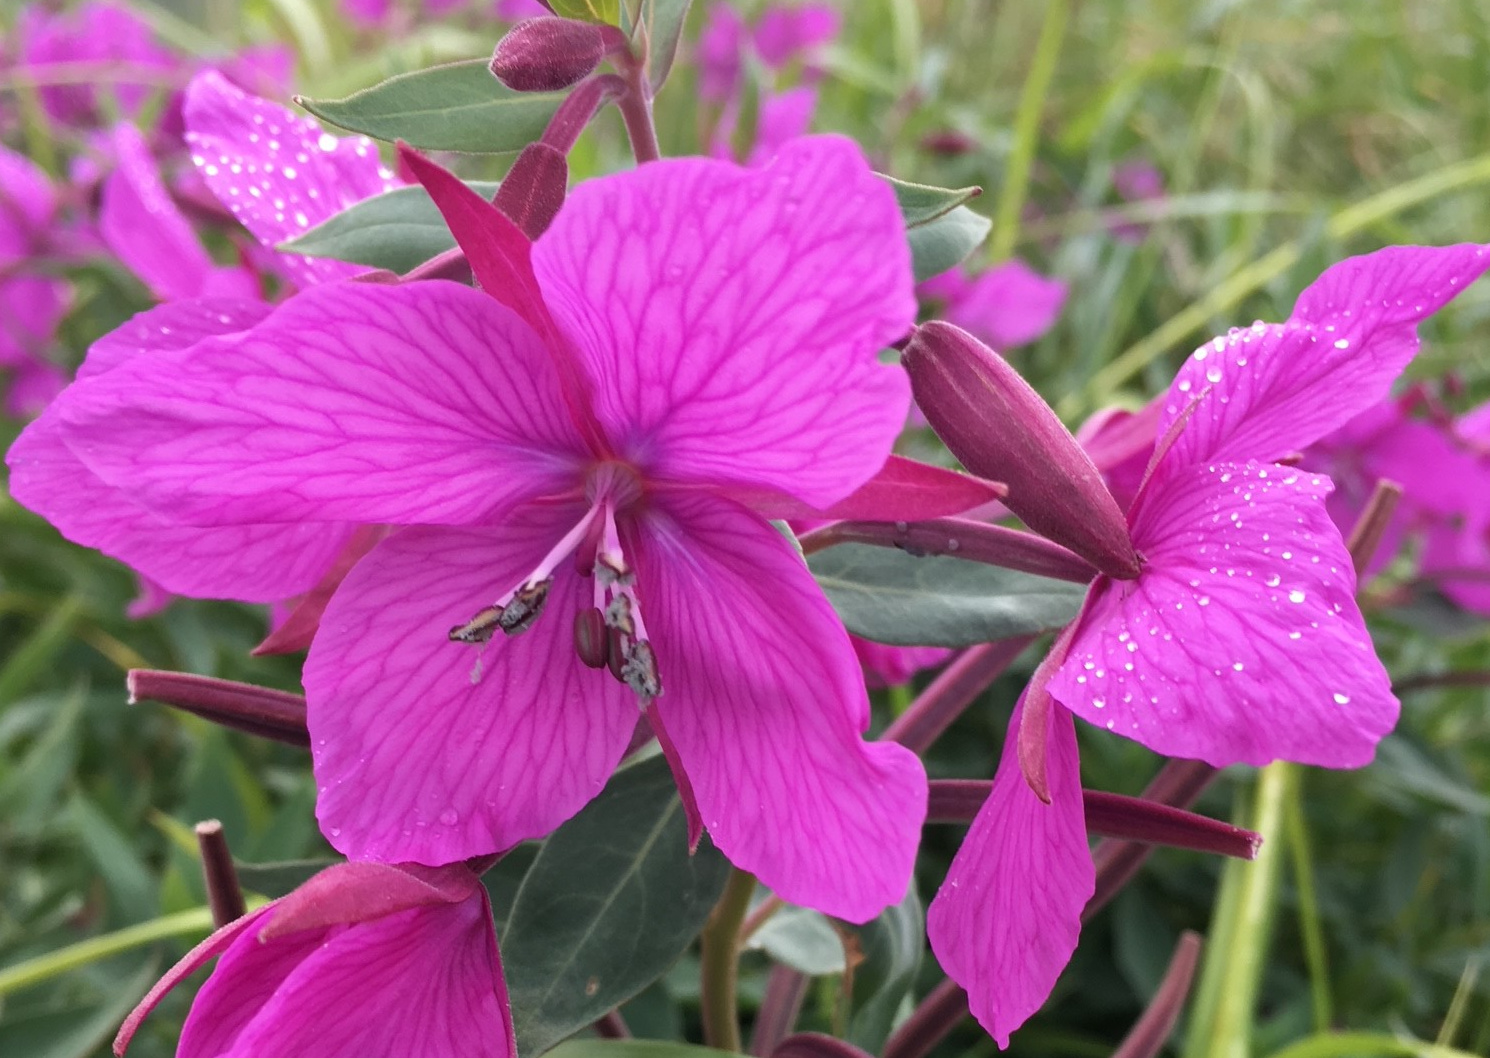 River Beauty or Dwarf Fireweed